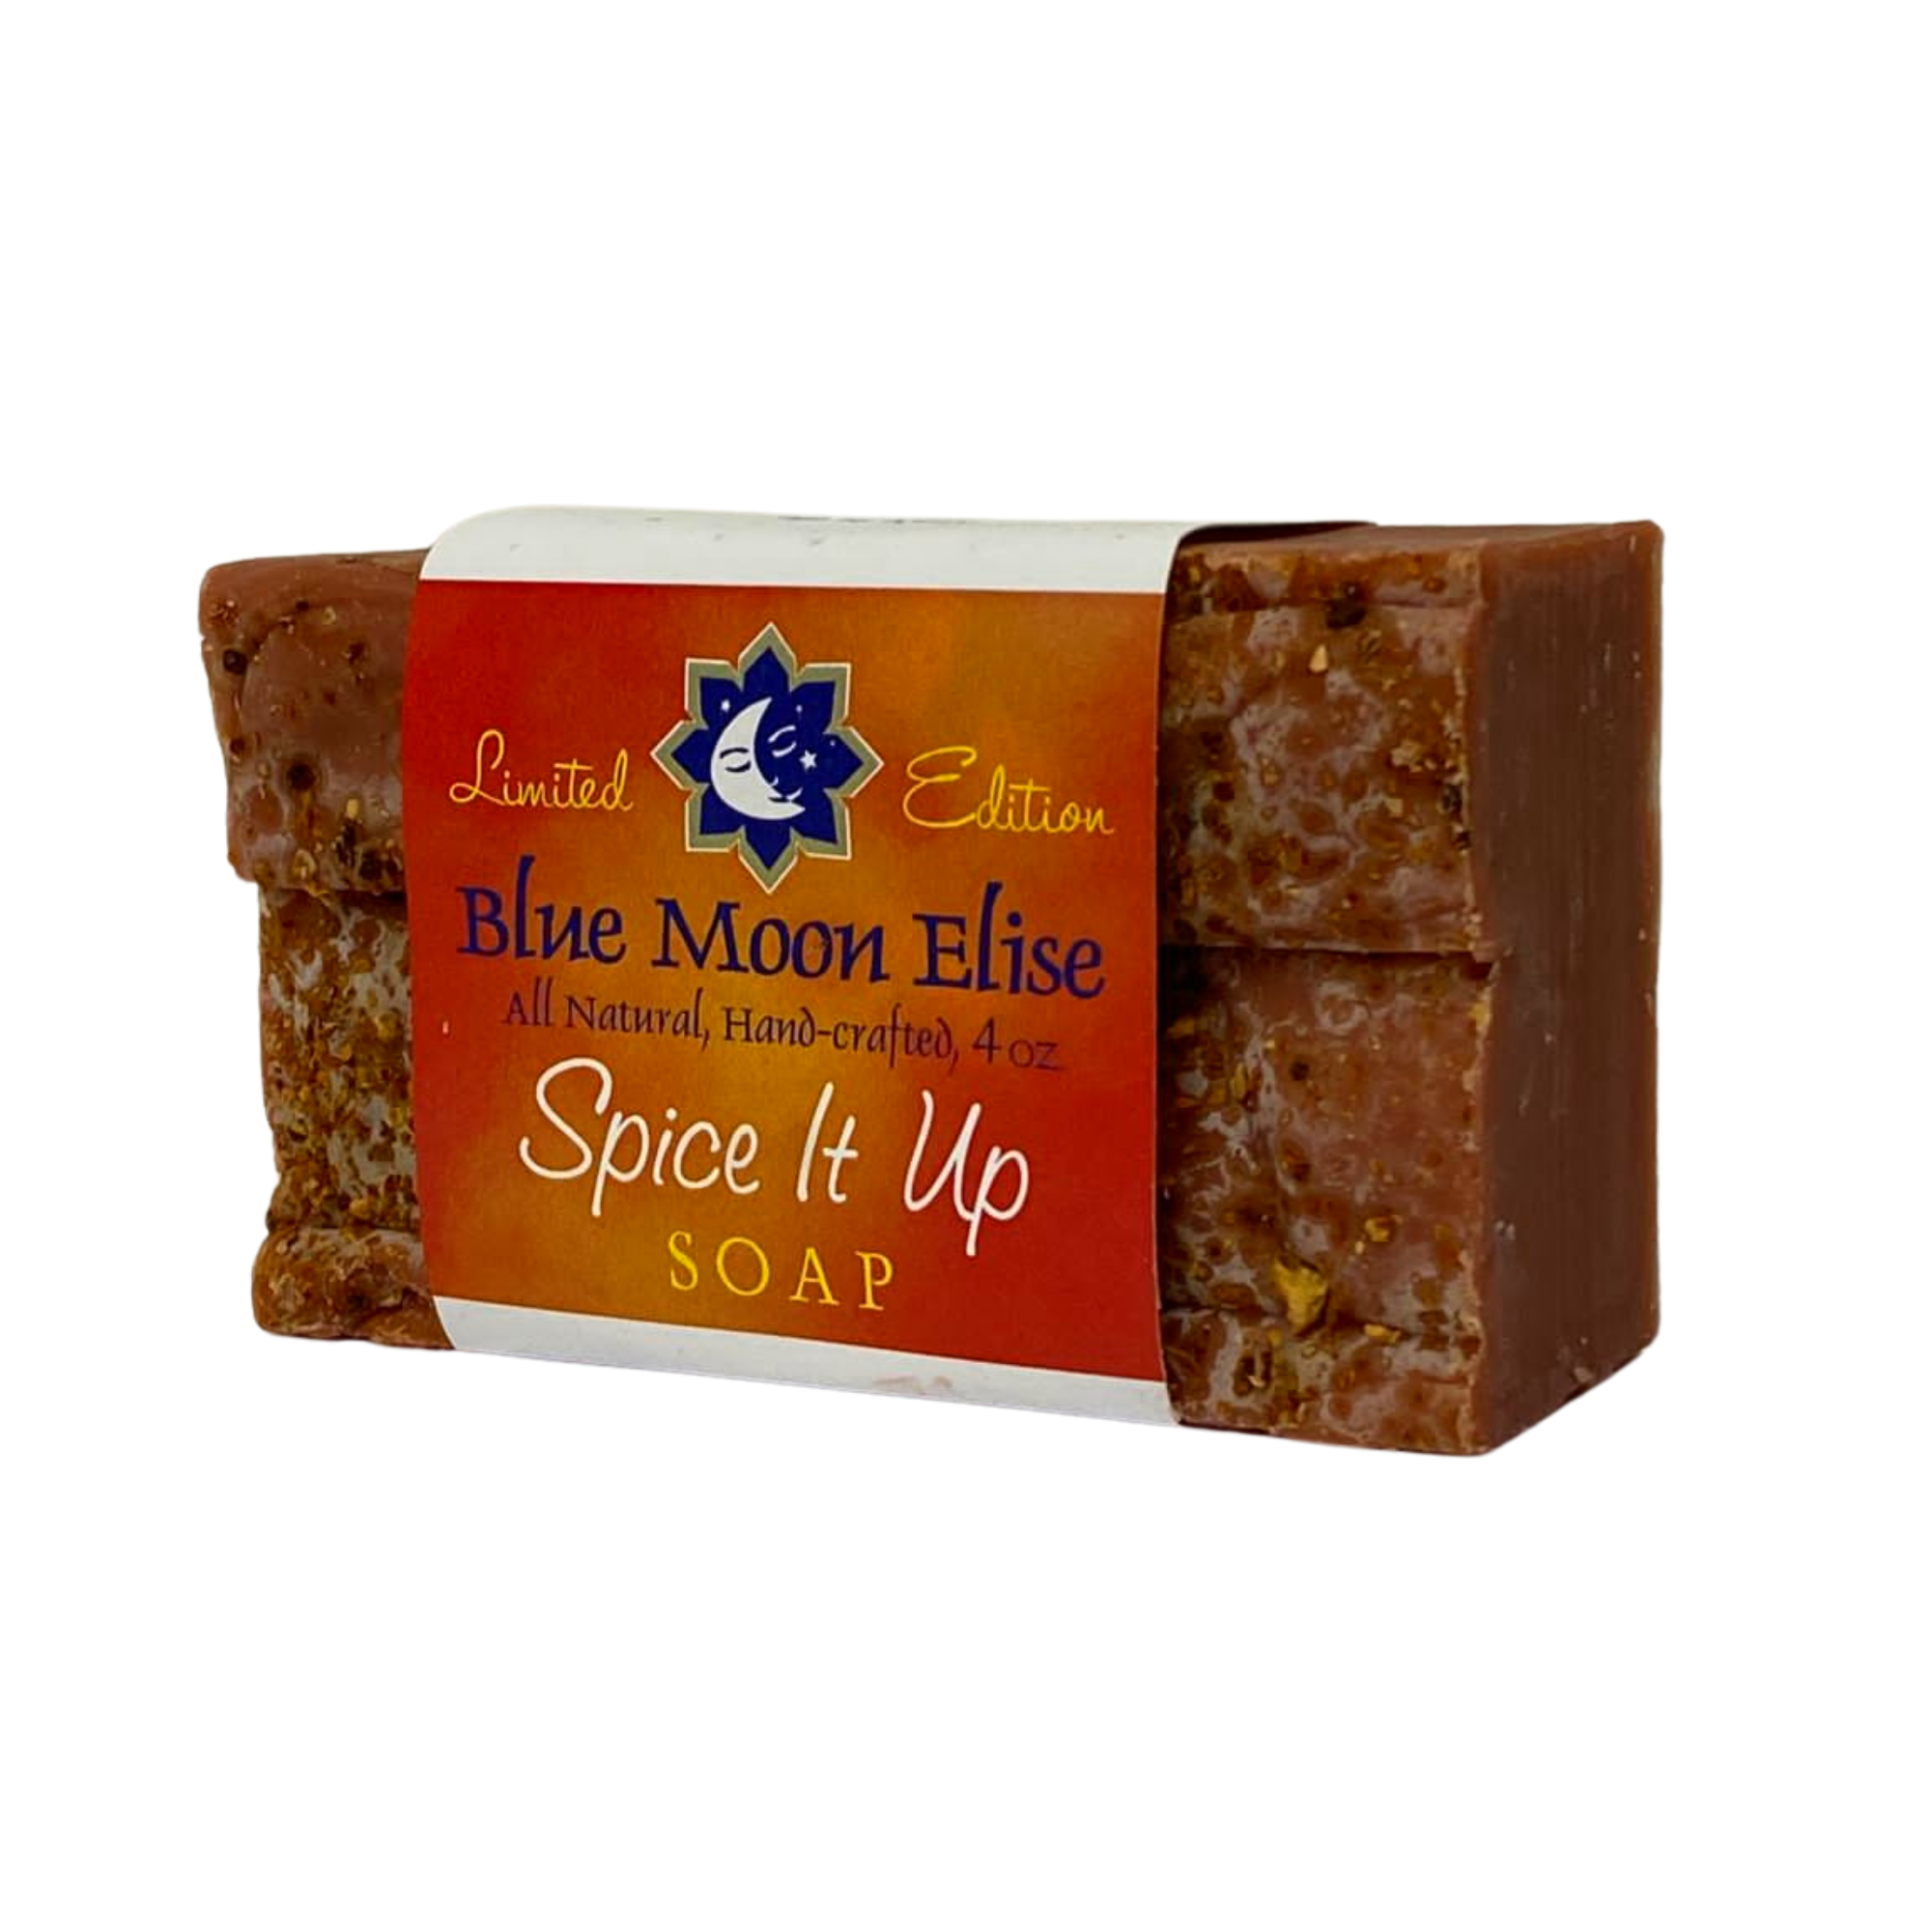 Spice it up Soap